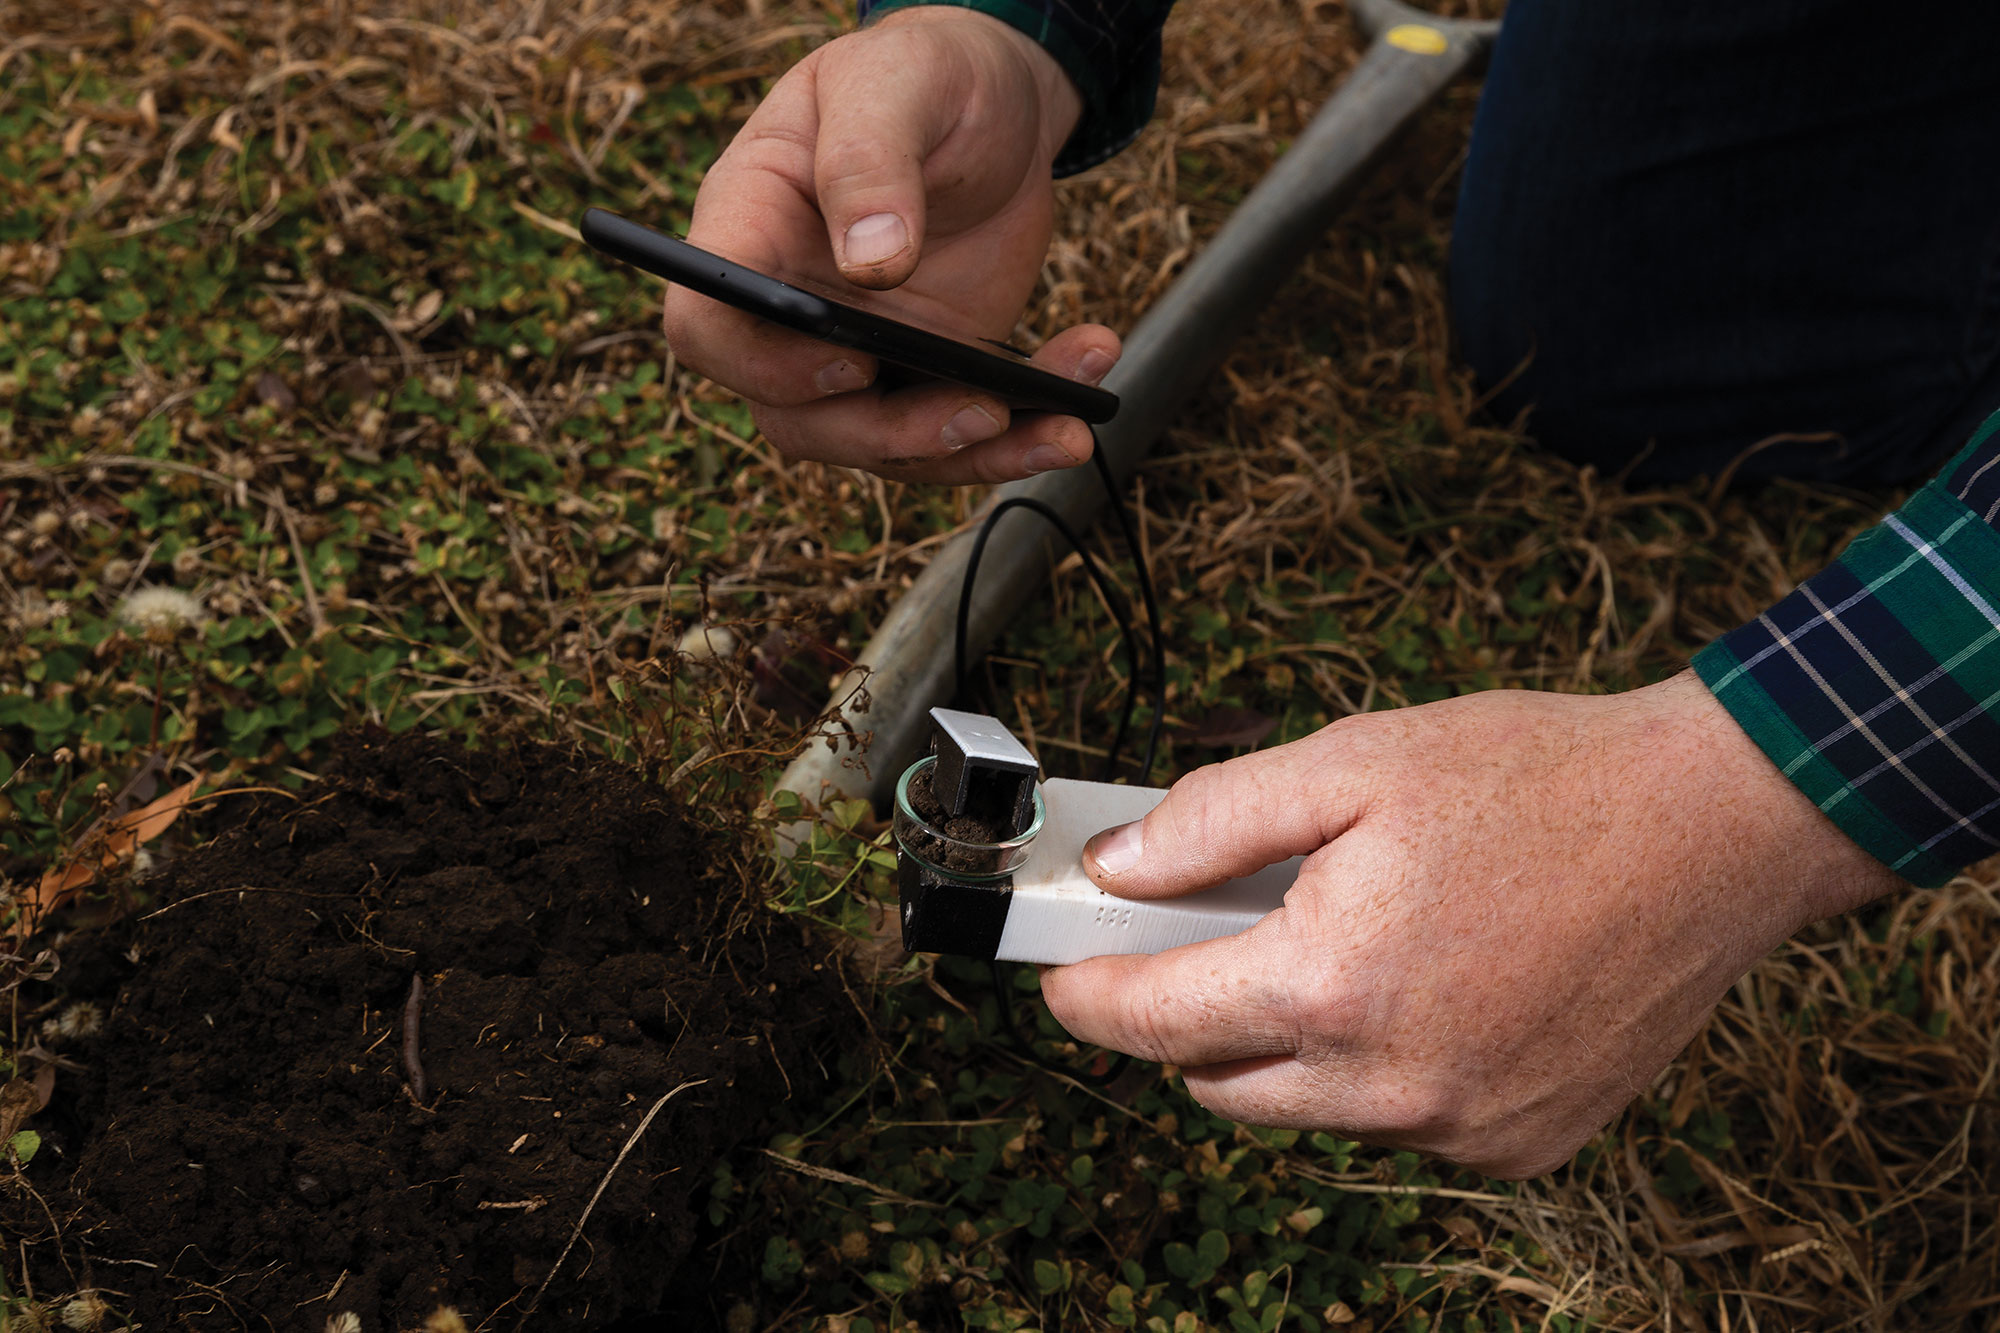 Inspecting soil with a sensor connected to a smart phone